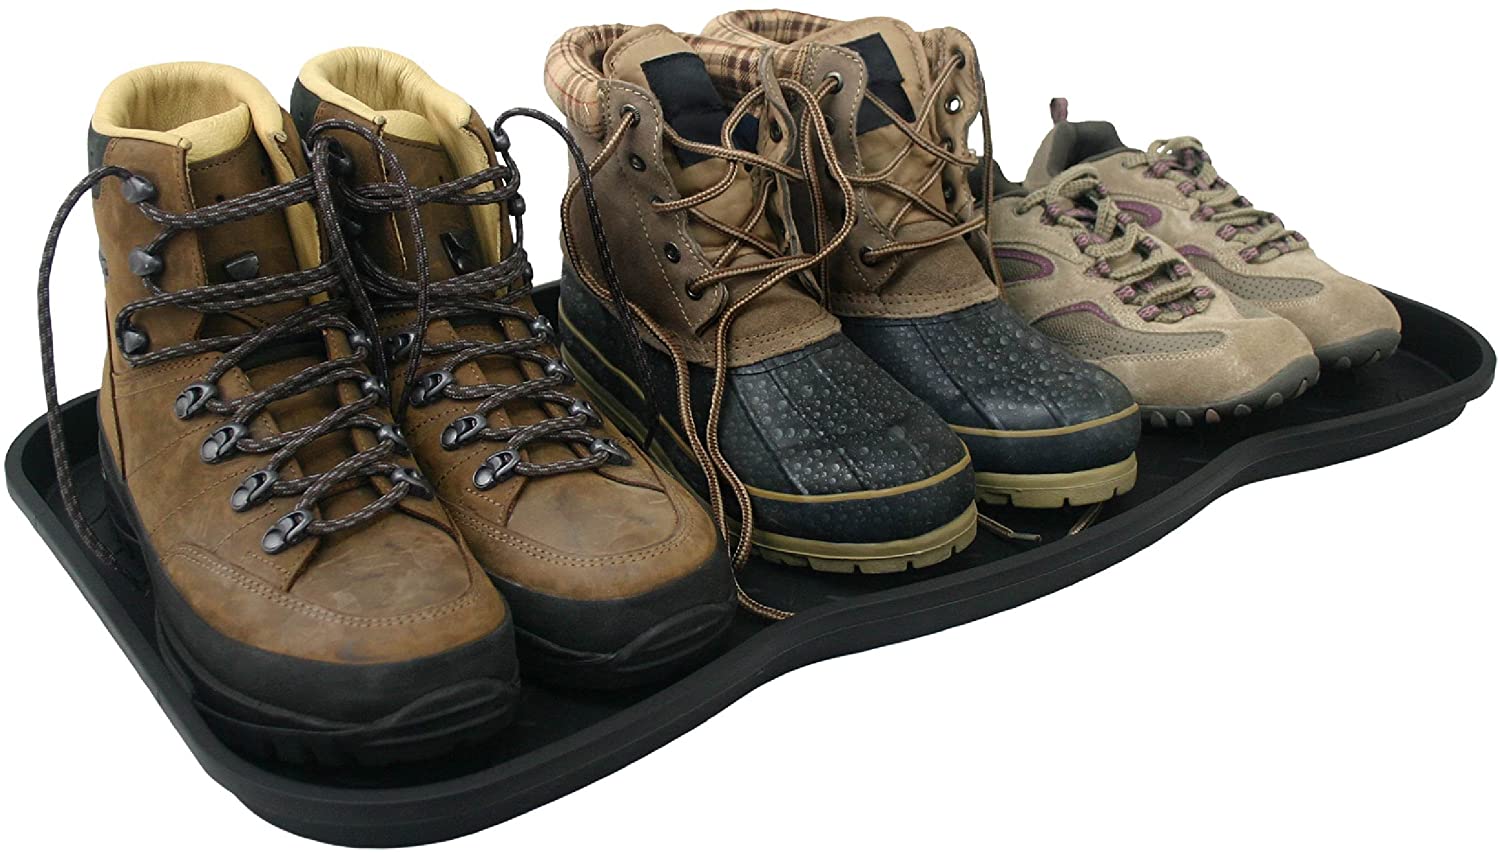 11 Best Boot Trays That Protect Your Floors in Winter 2023